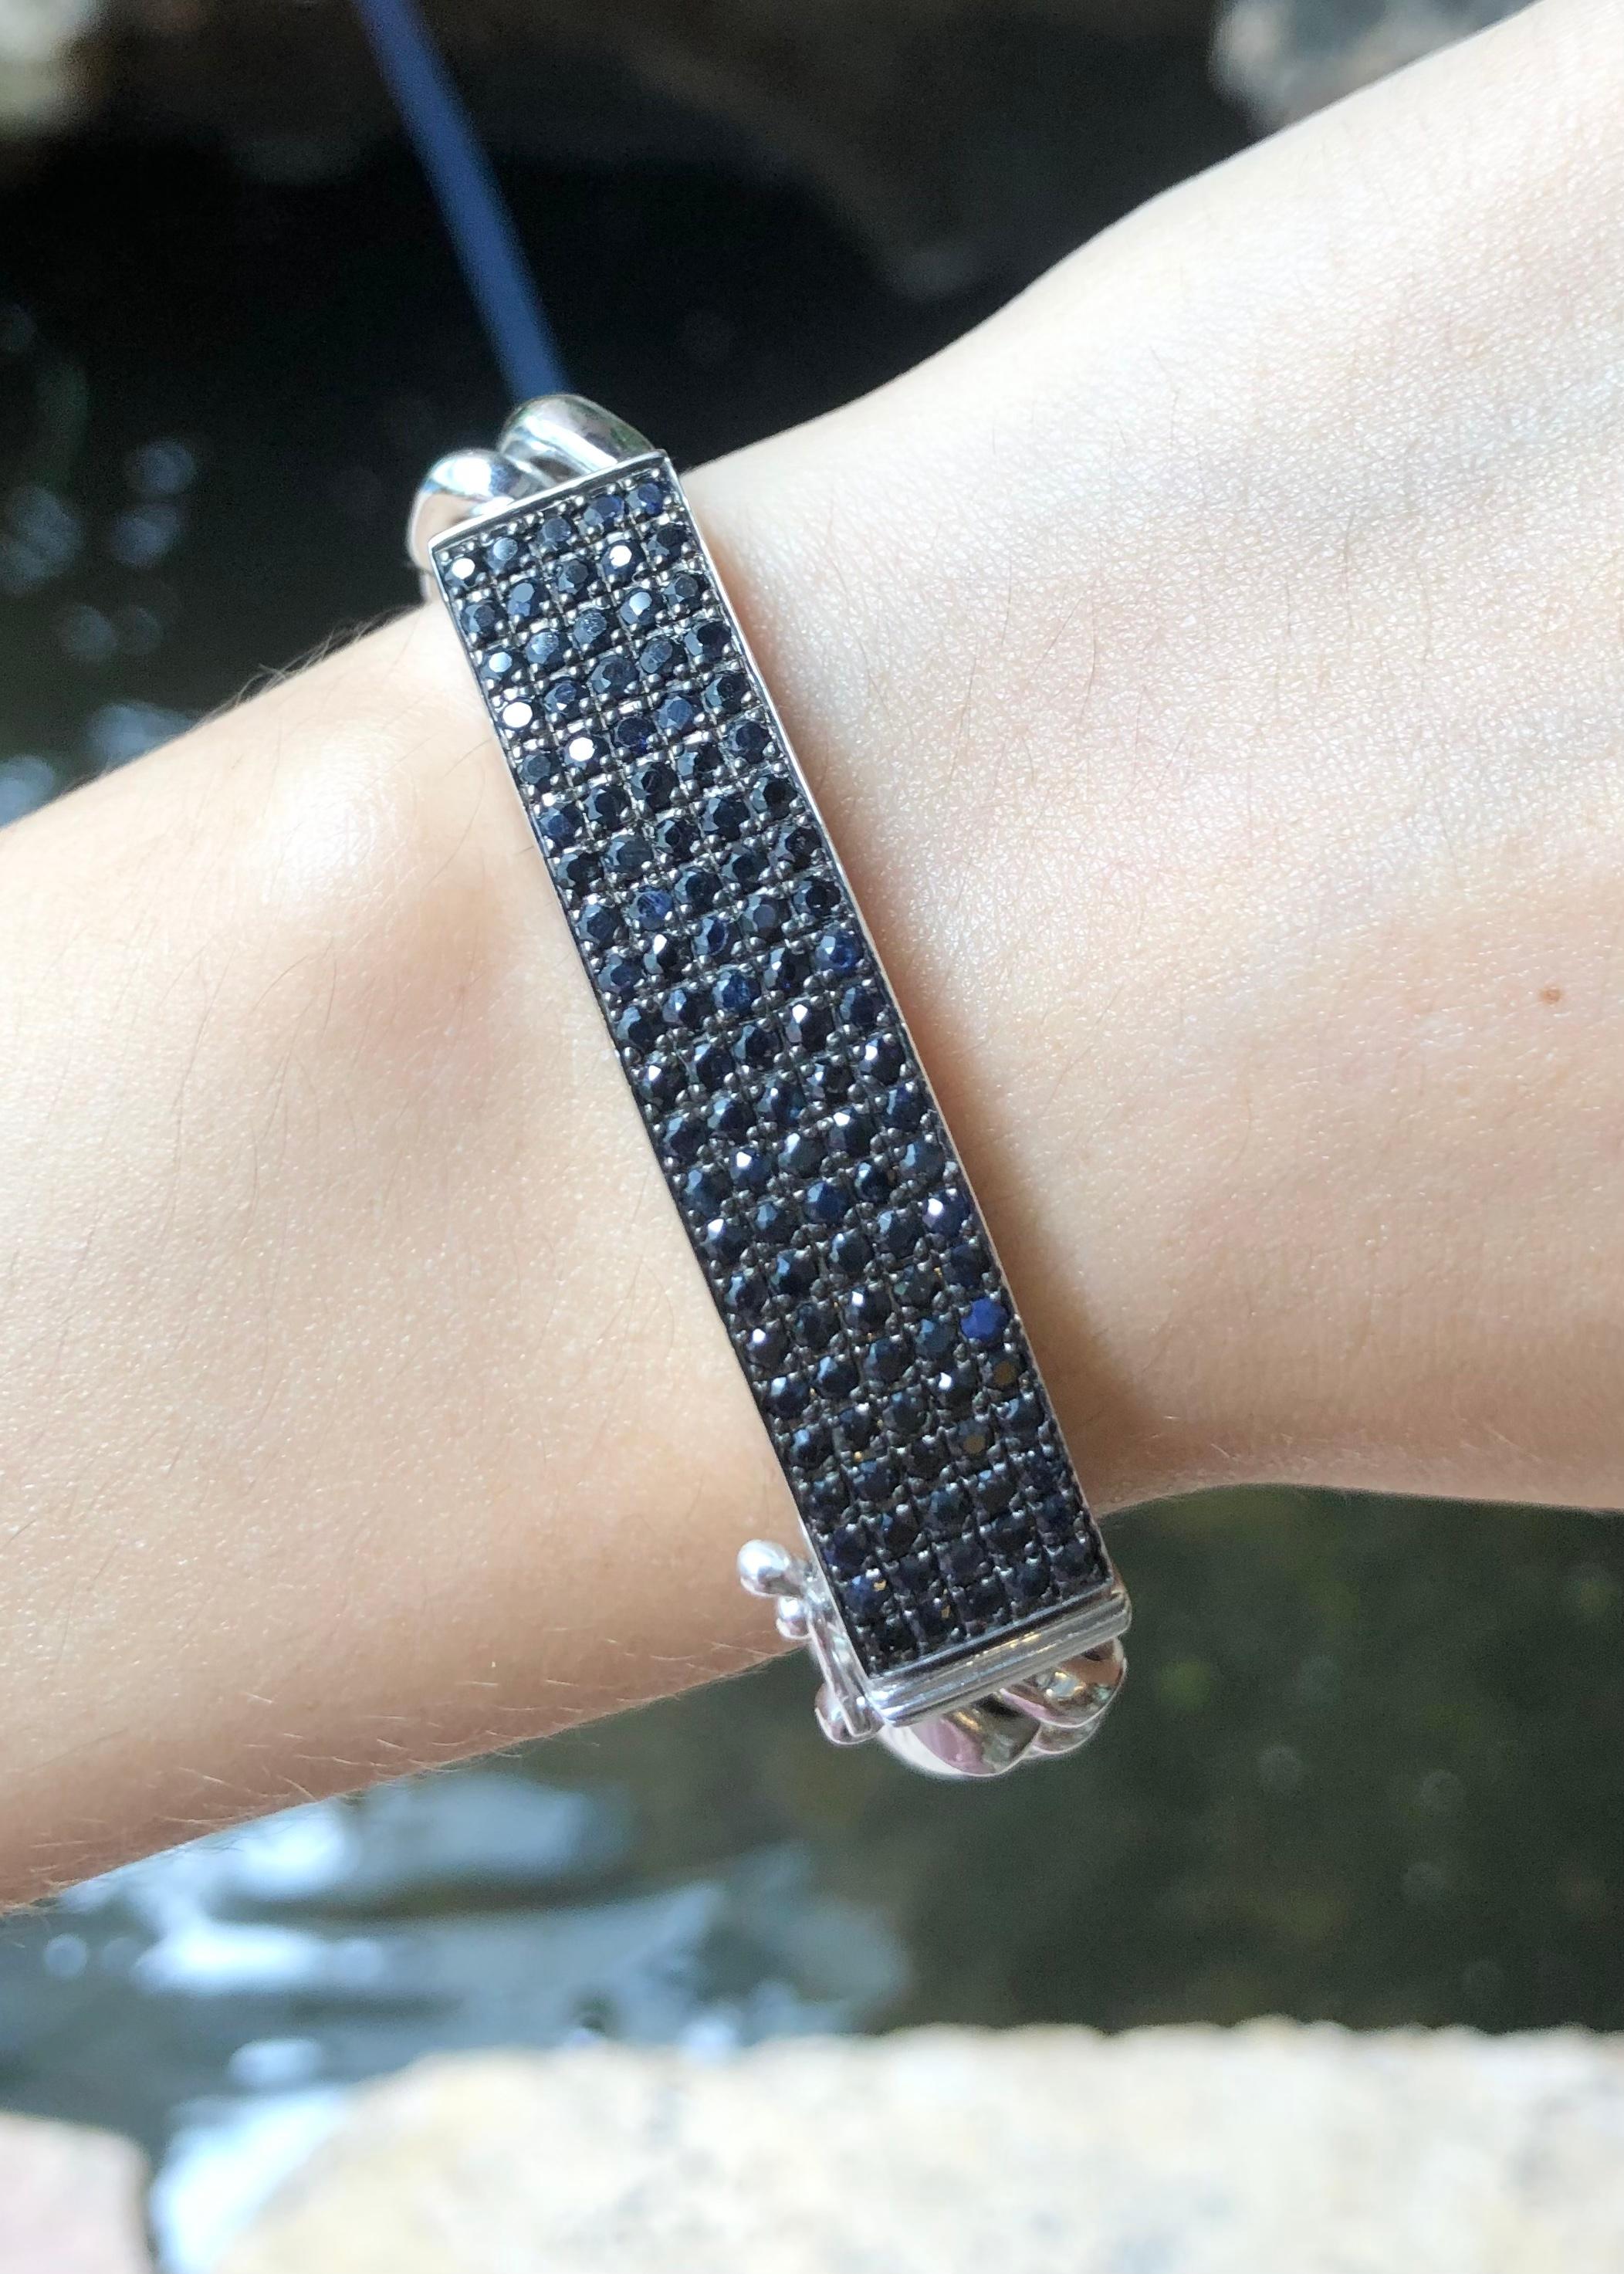 Black Sapphire 3.70 carats Bracelet set in Silver Settings

Width:  1.1 cm 
Length: 18.0 cm
Total Weight: 61.77 grams

*Please note that the silver setting is plated with rhodium to promote shine and help prevent oxidation.  However, with the nature